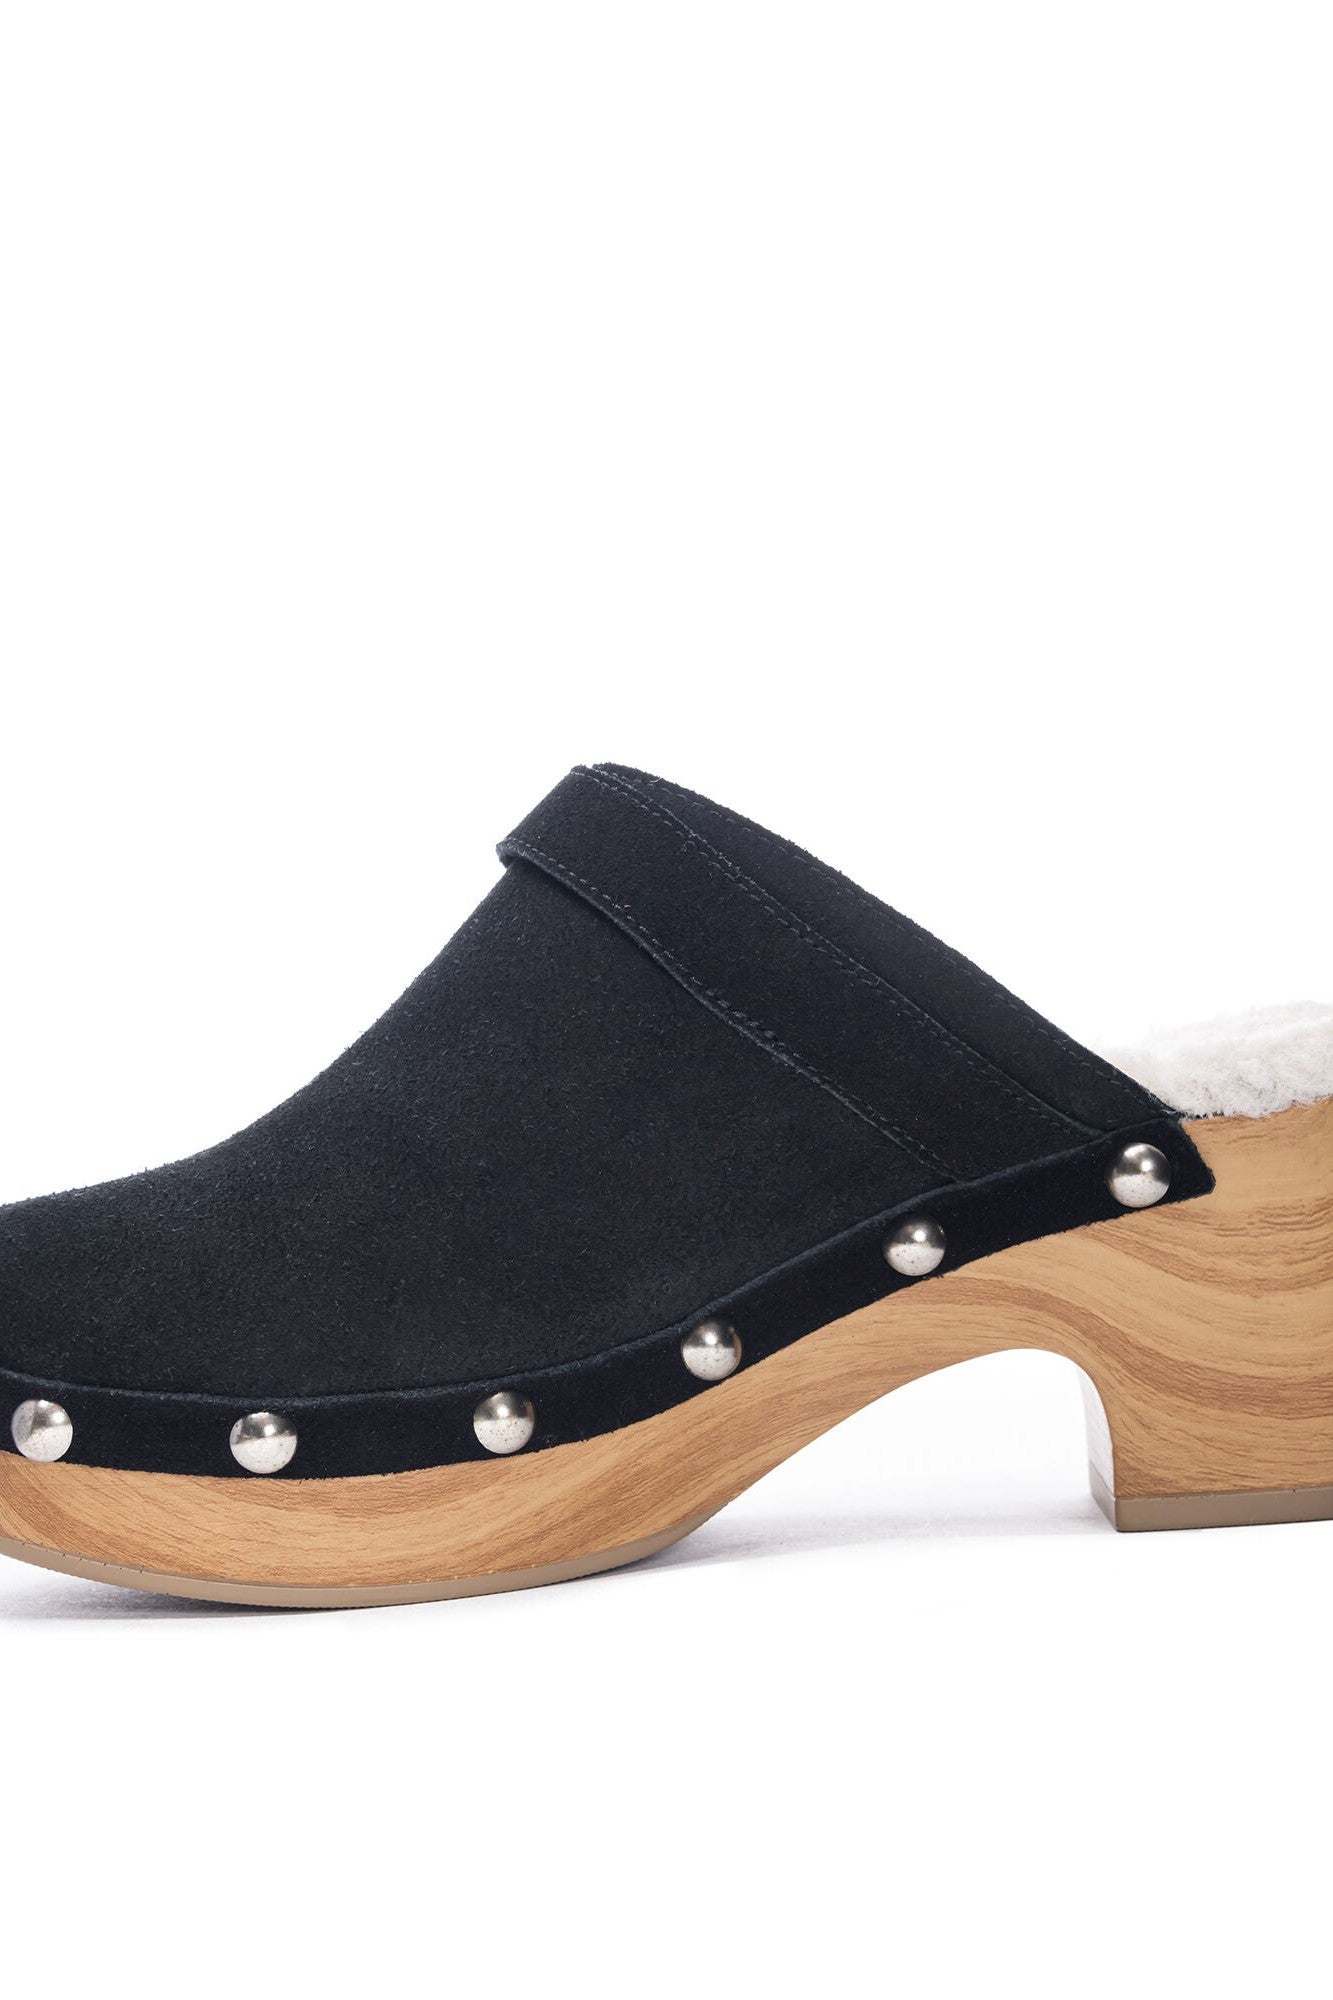 Chinese Laundry - Carlie Suede Clog - Black